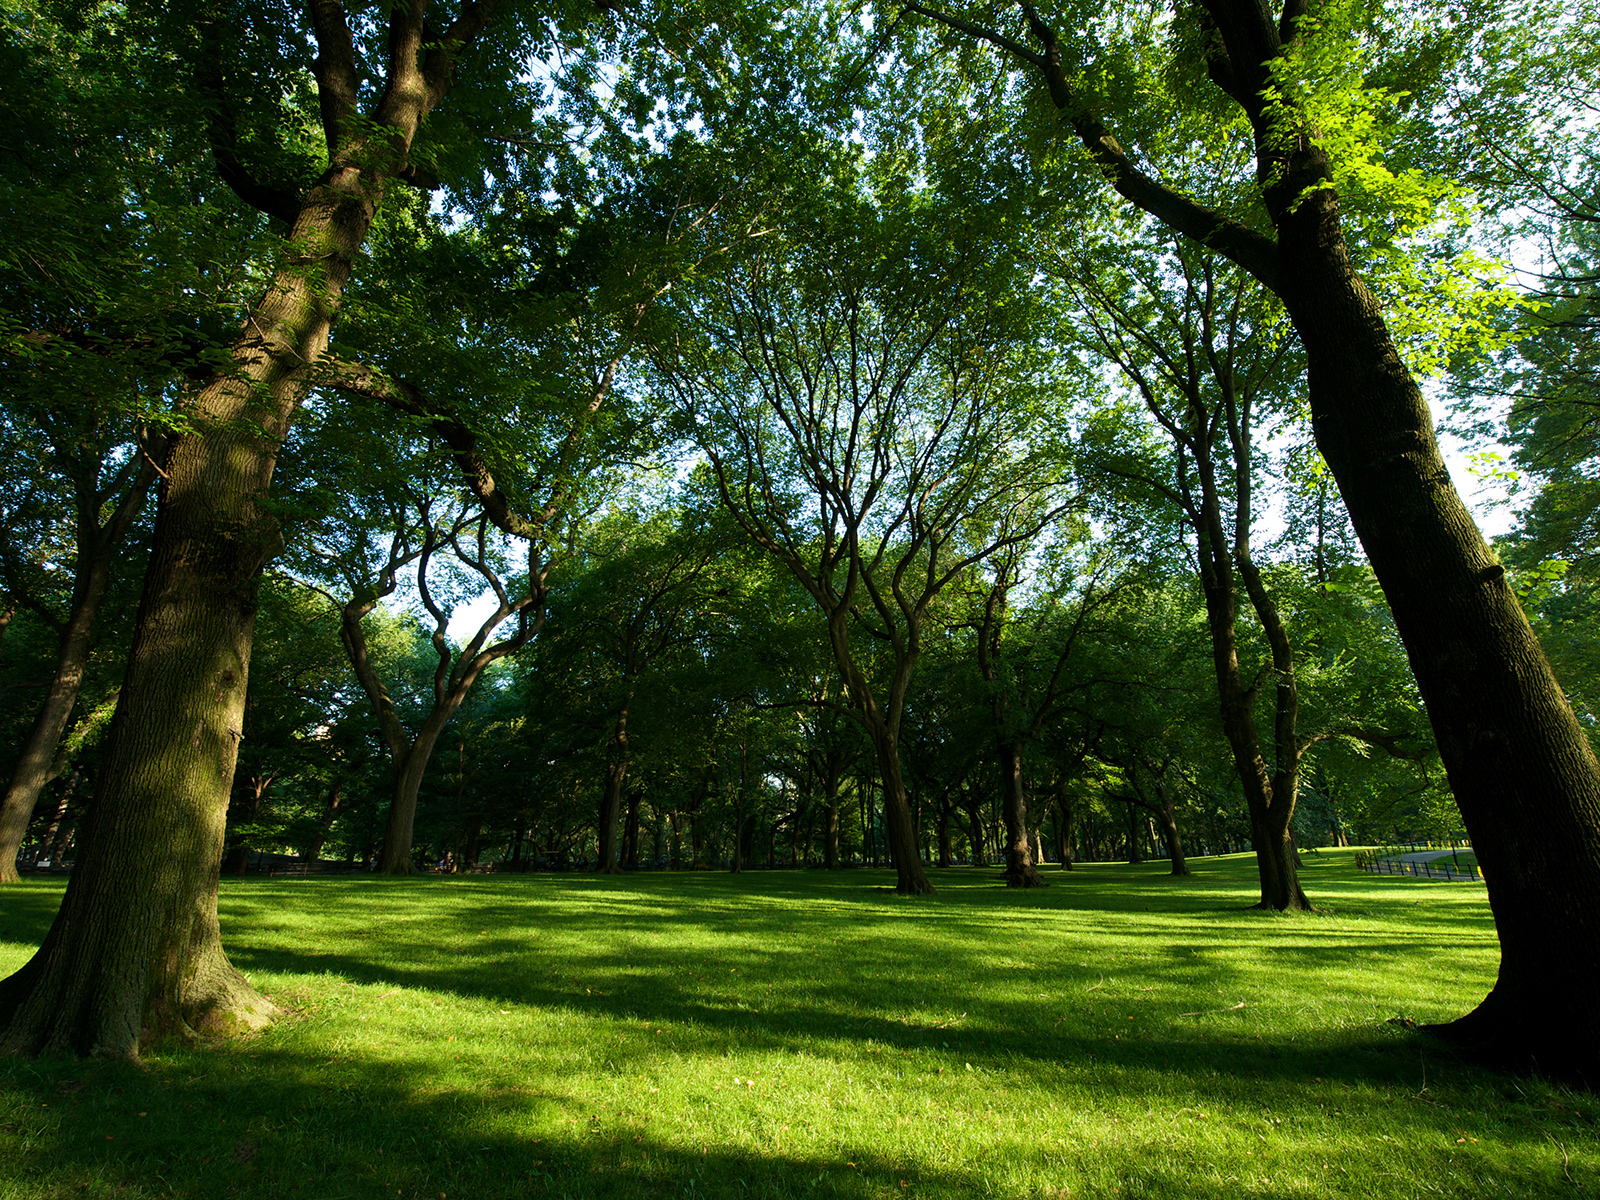 green canopy of trees in Central Park, New York, USA